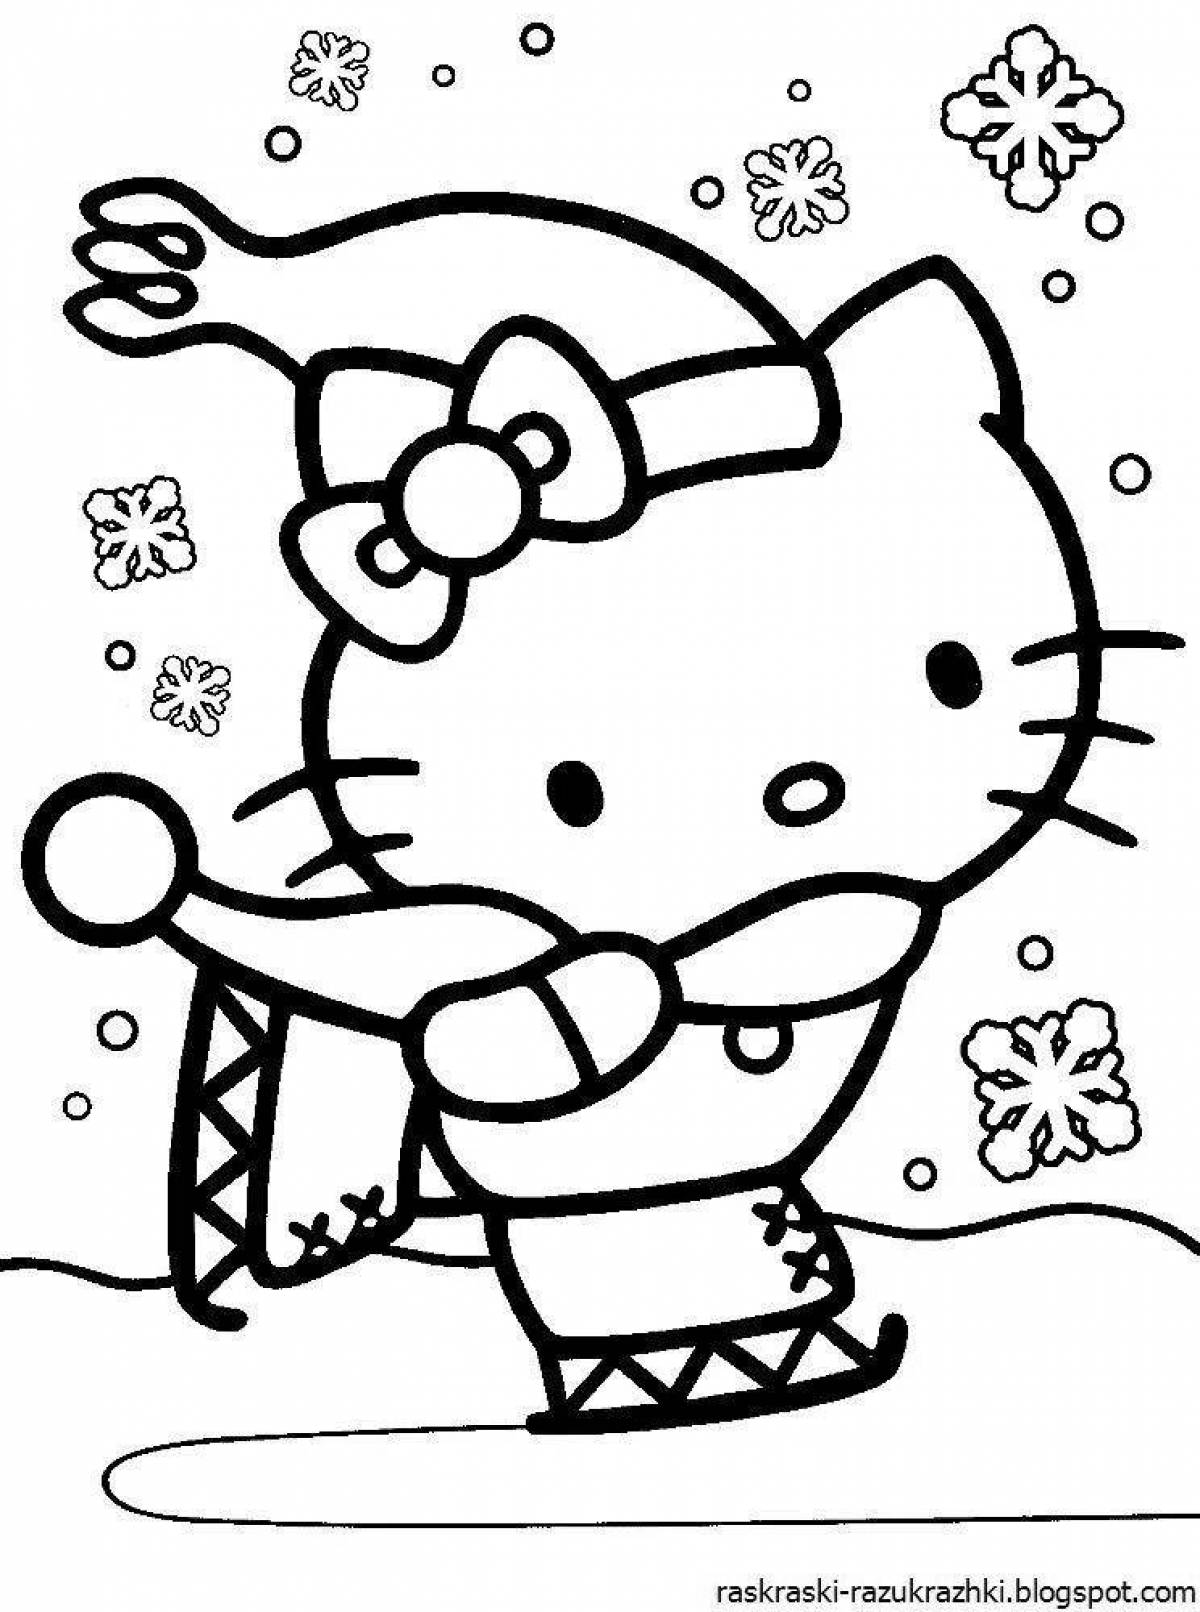 Awesome coloring by numbers hello kitty